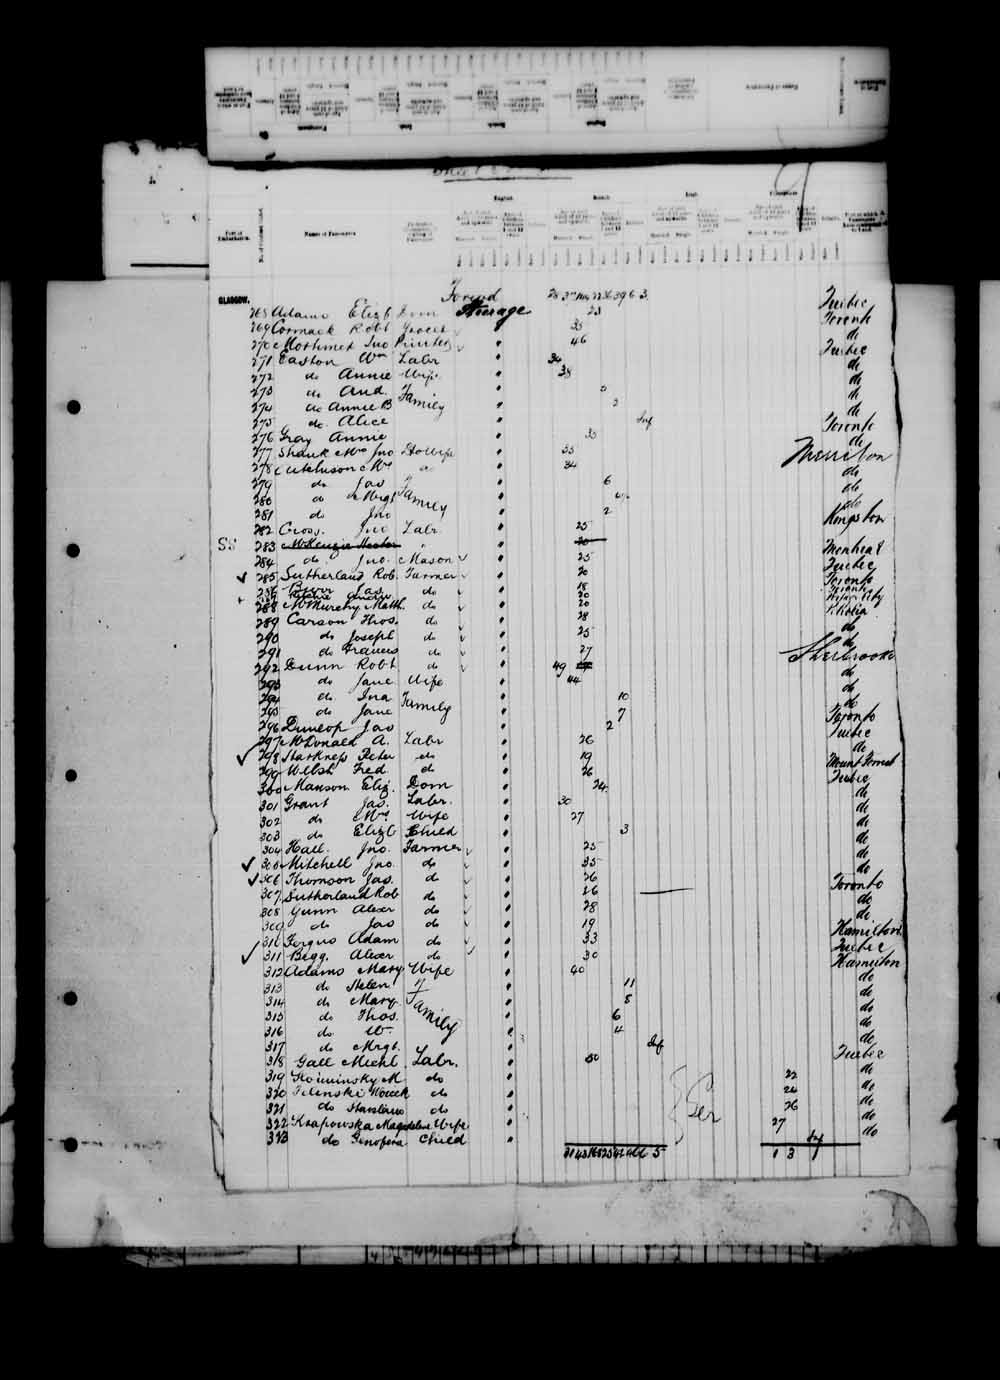 Digitized page of Passenger Lists for Image No.: e003542773